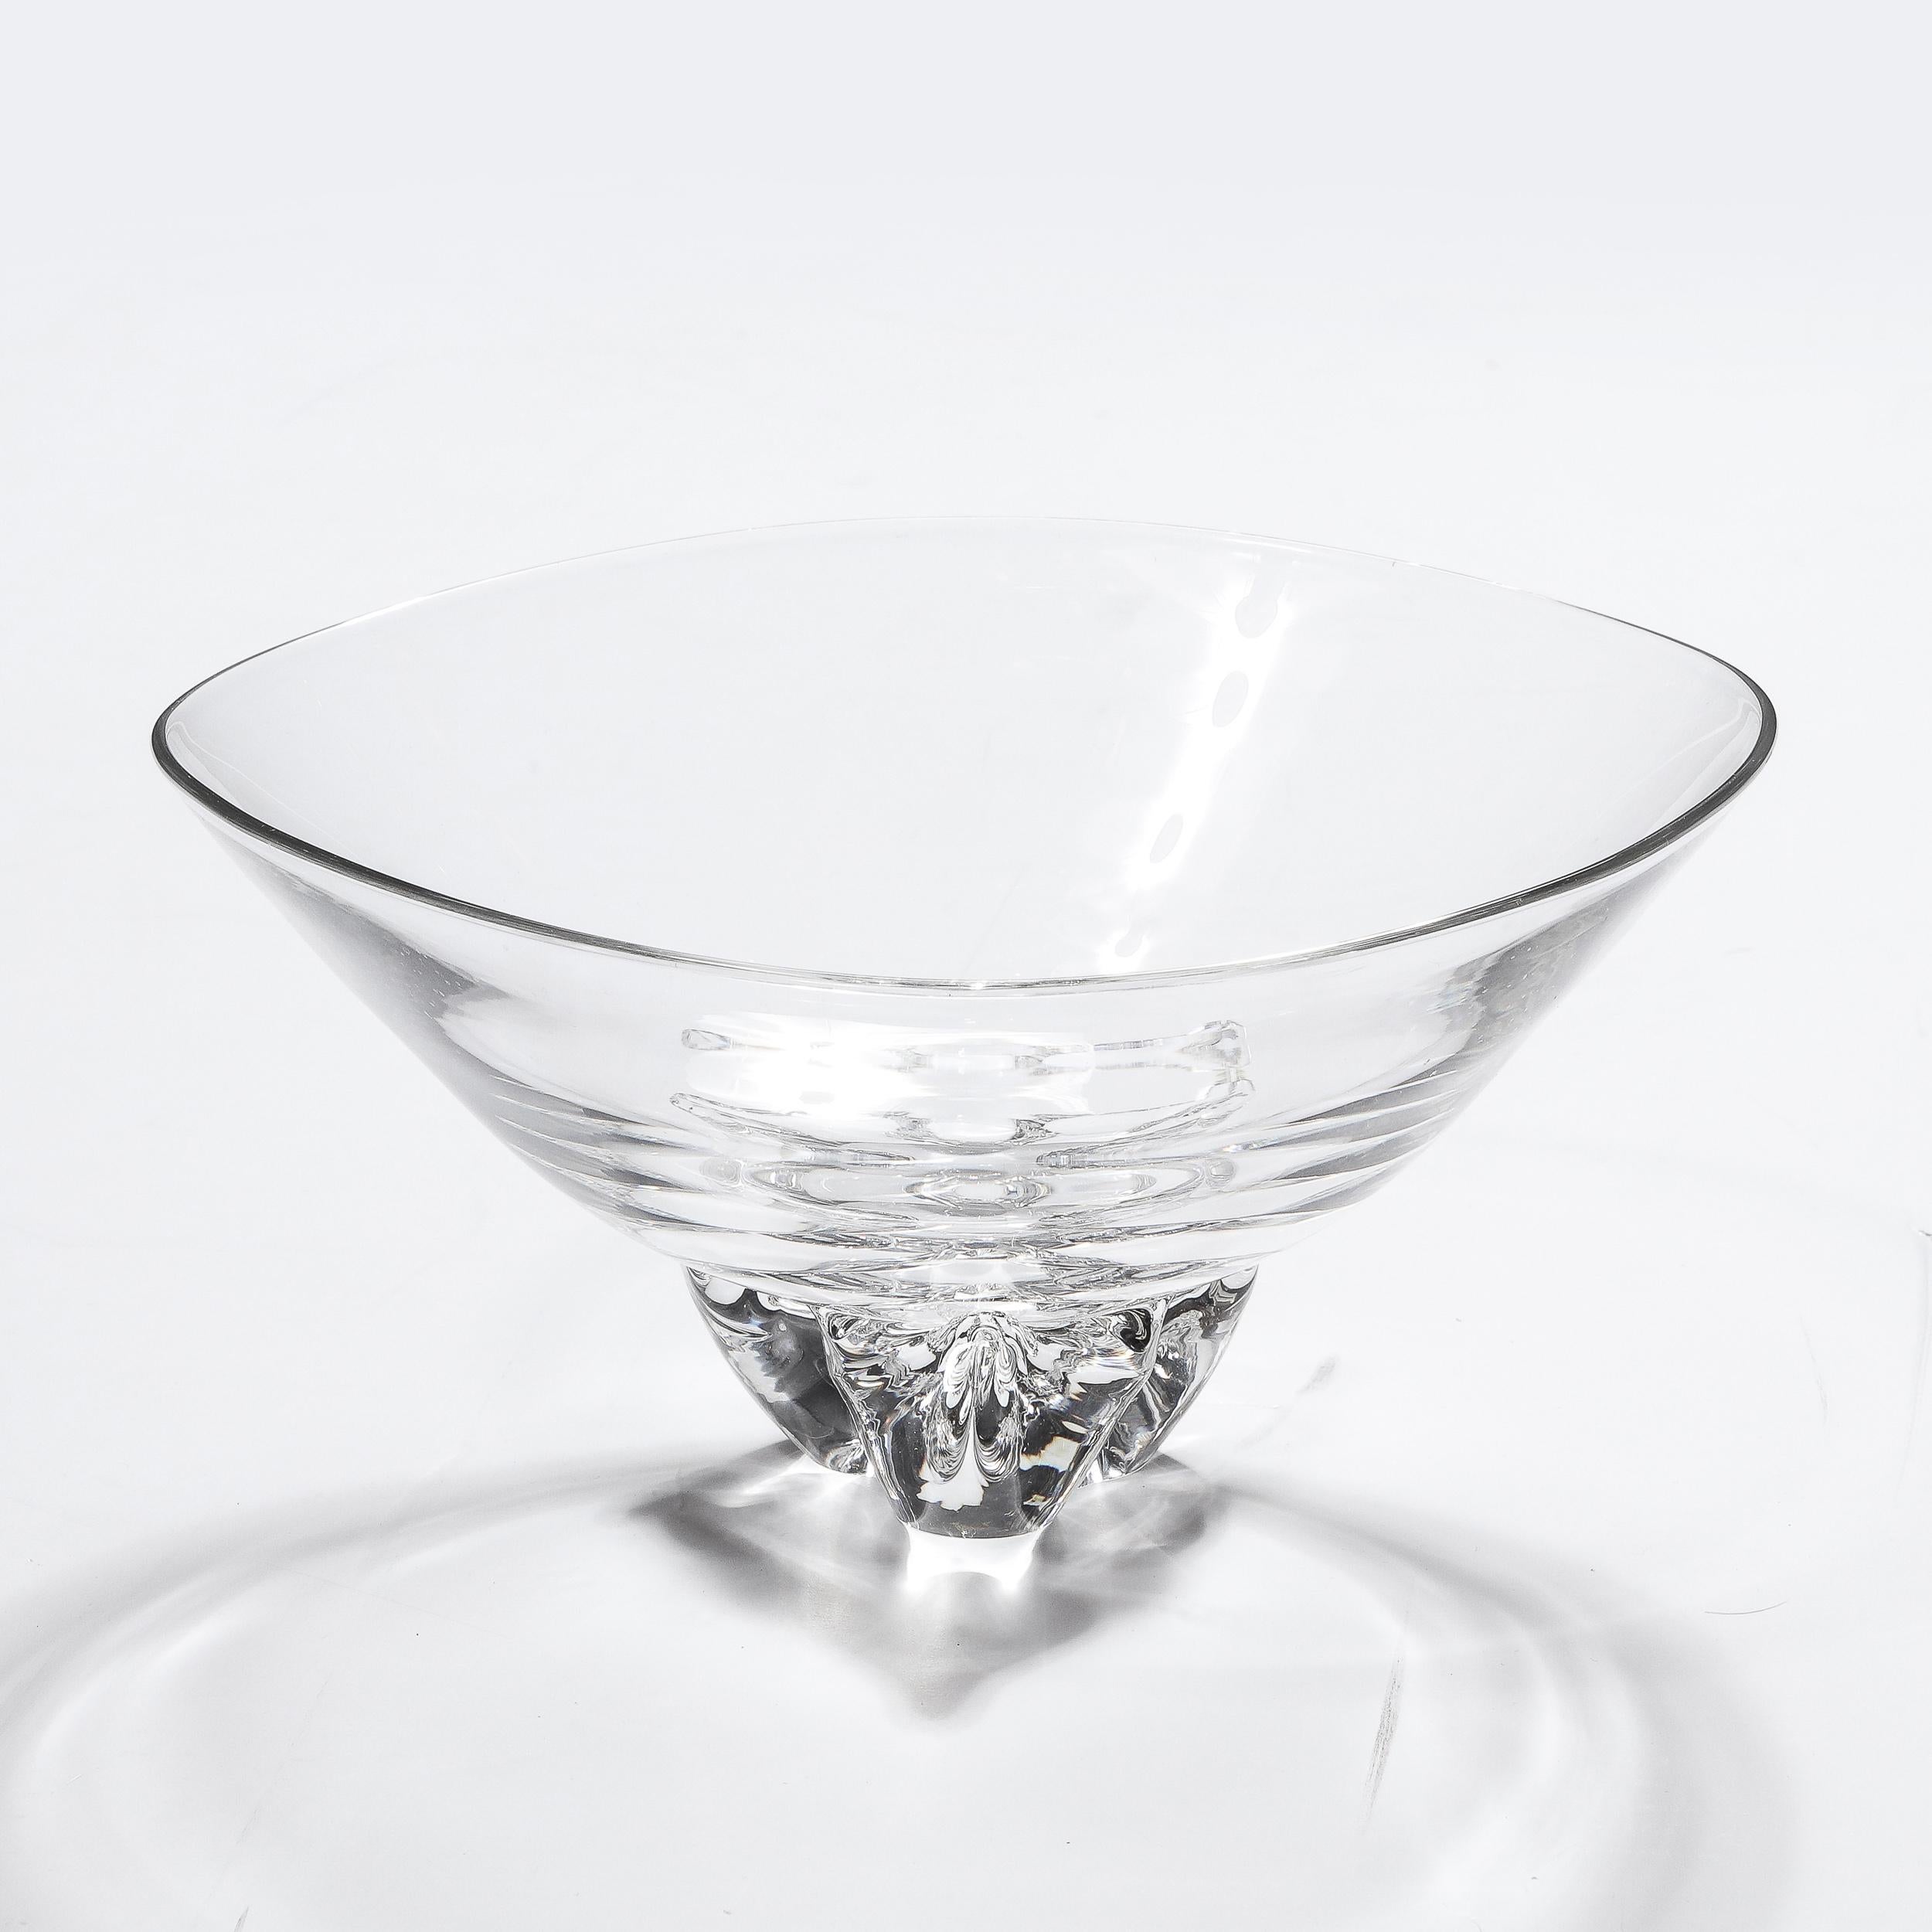 Mid-20th Century Mid-Century Modernist Hand-Blown Glass Bowl with Organic Base Signed Steuben For Sale